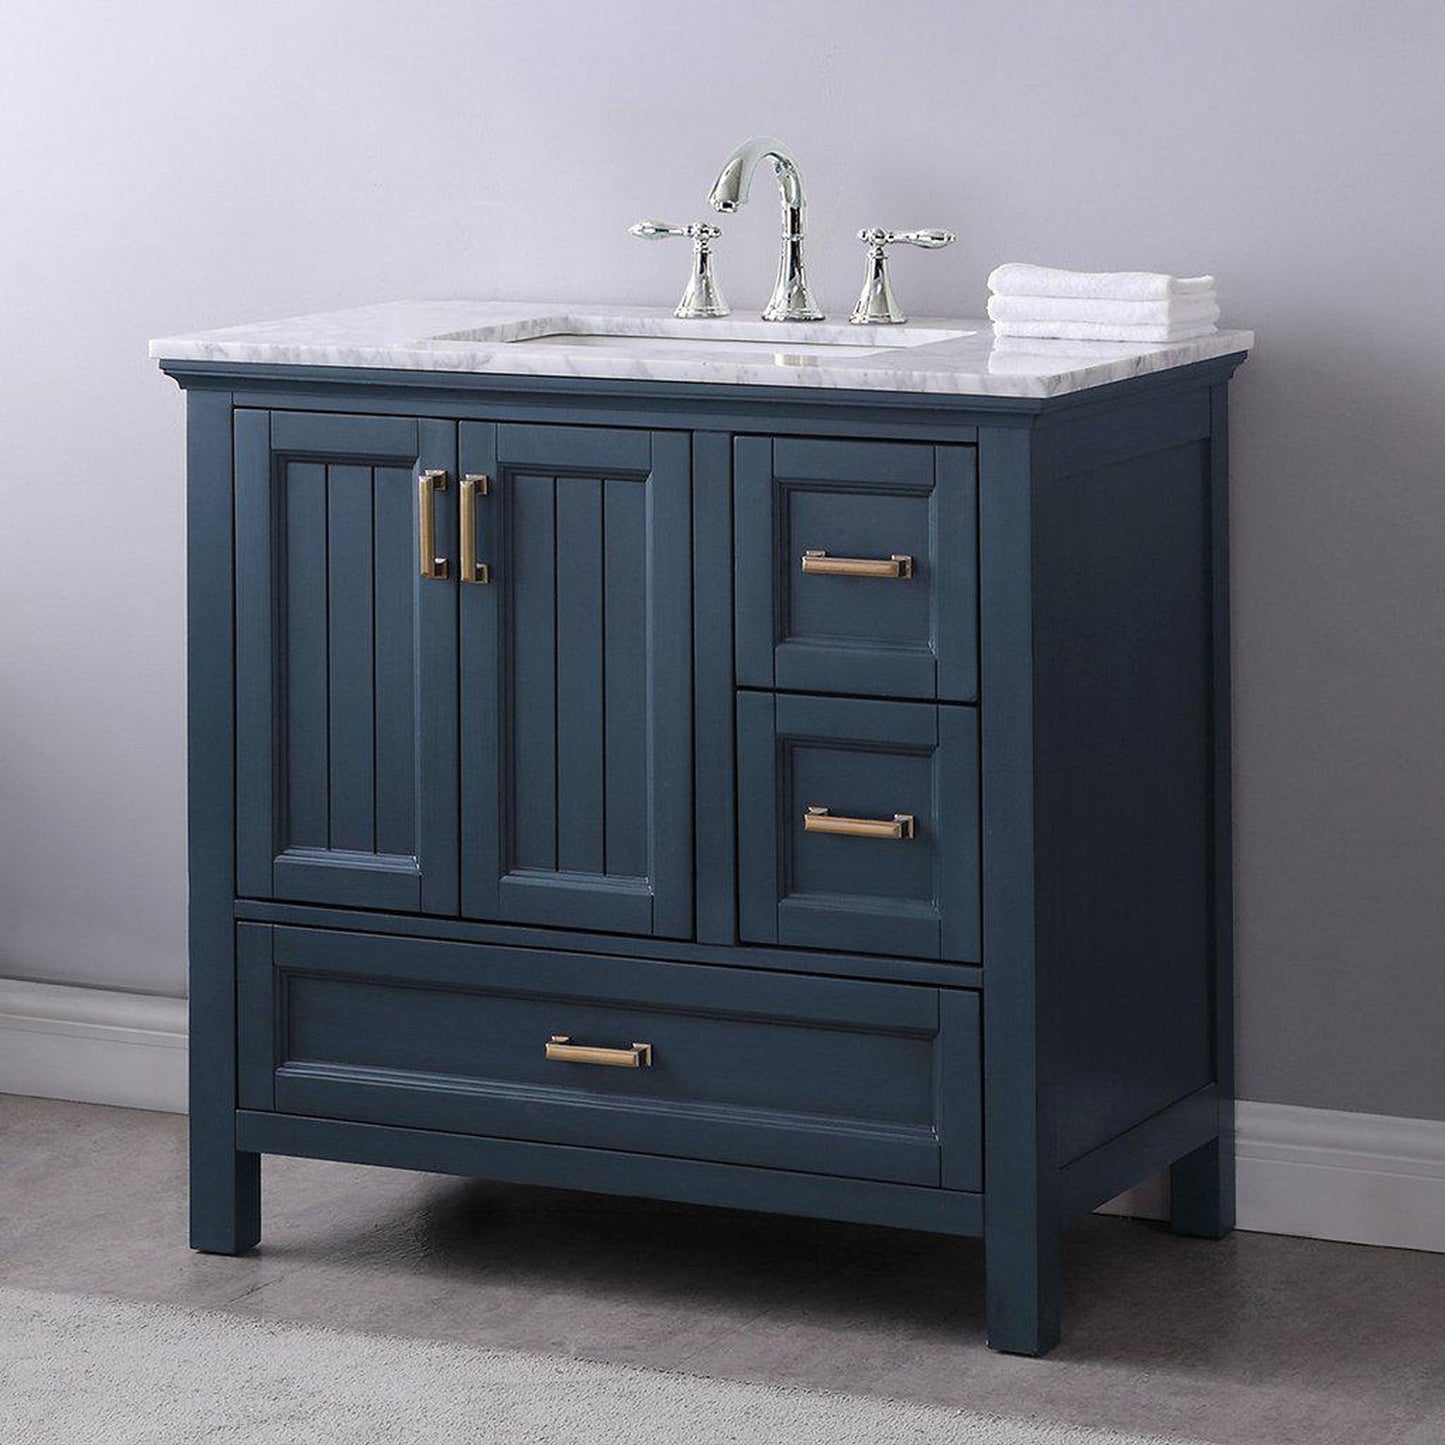 Altair Isla 36" Single Classic Blue Freestanding Bathroom Vanity Set With Natural Carrara White Marble Top, Rectangular Undermount Ceramic Sink, and Overflow